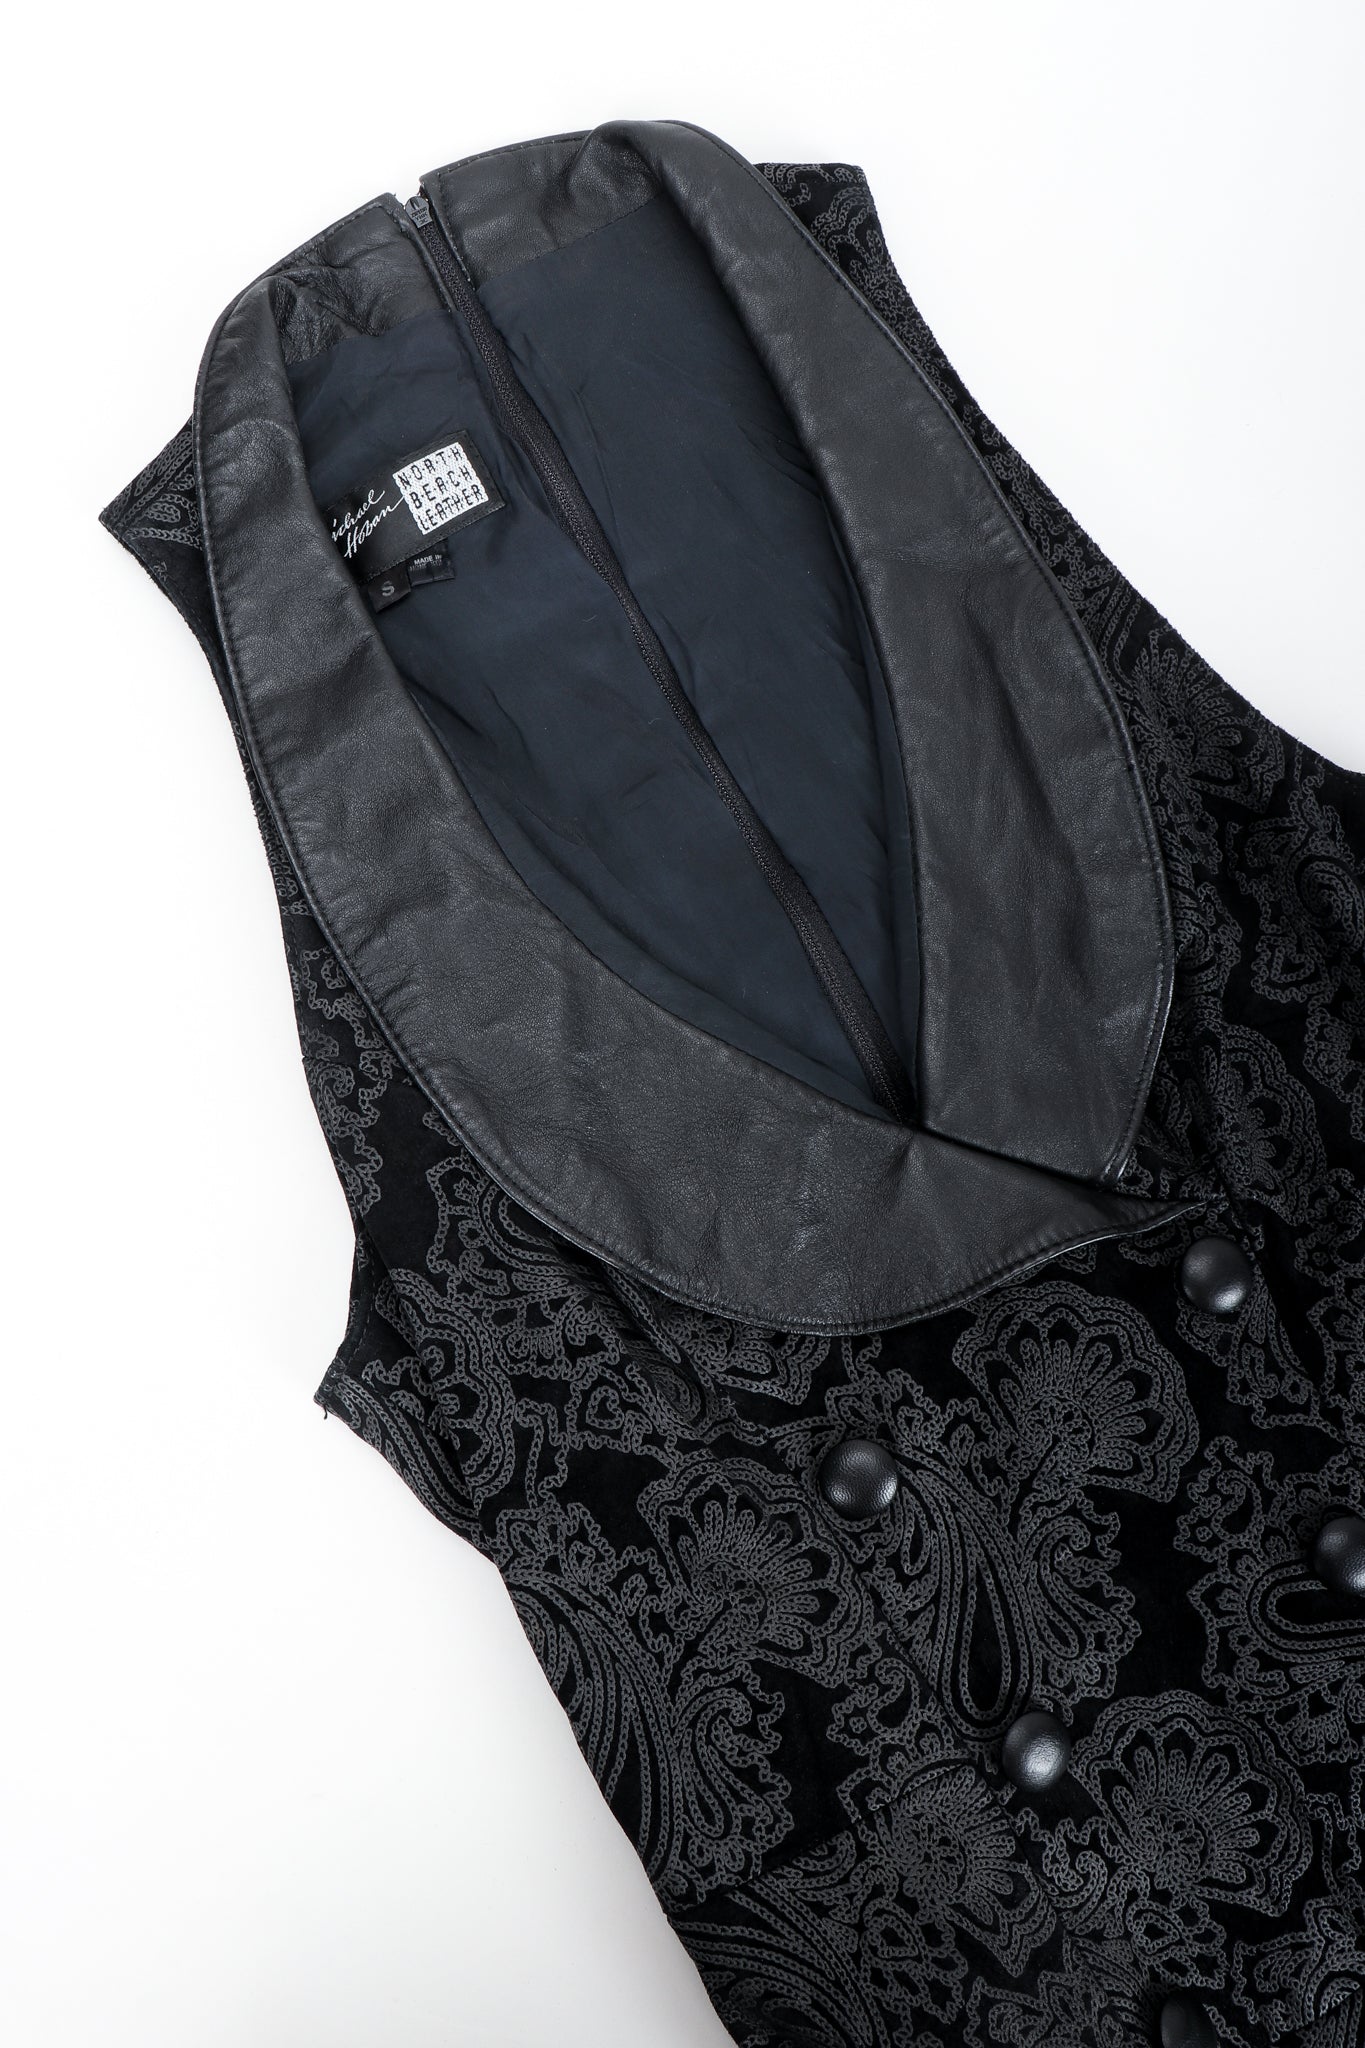 Vintage North Beach Leather Paisley Tuxedo Dress Collar Details at Recess